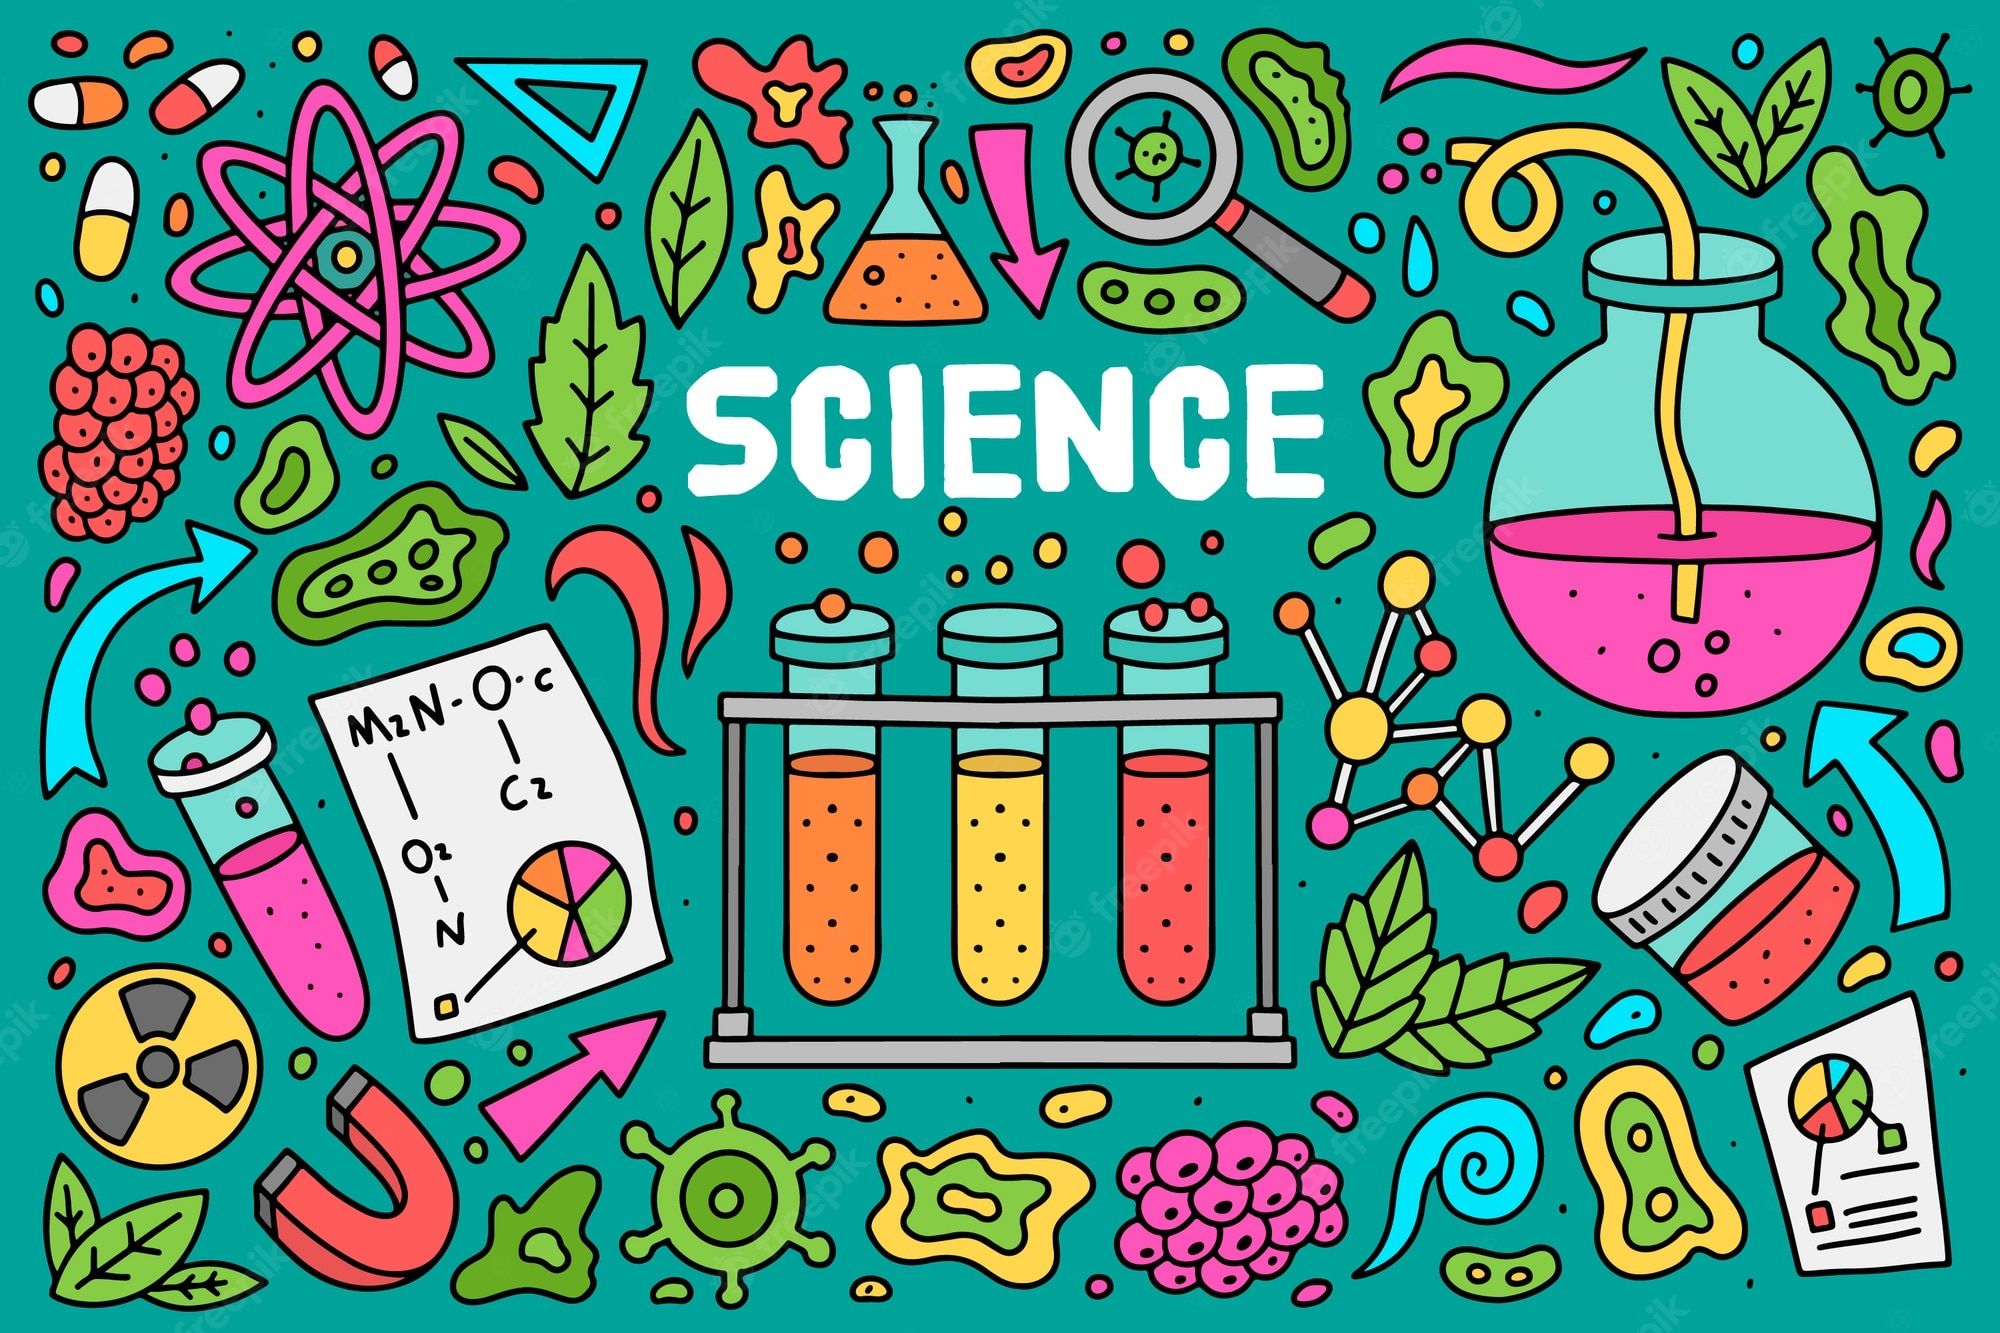 A banner with science-related items such as a microscope, test tubes, and a magnifying glass. - Science